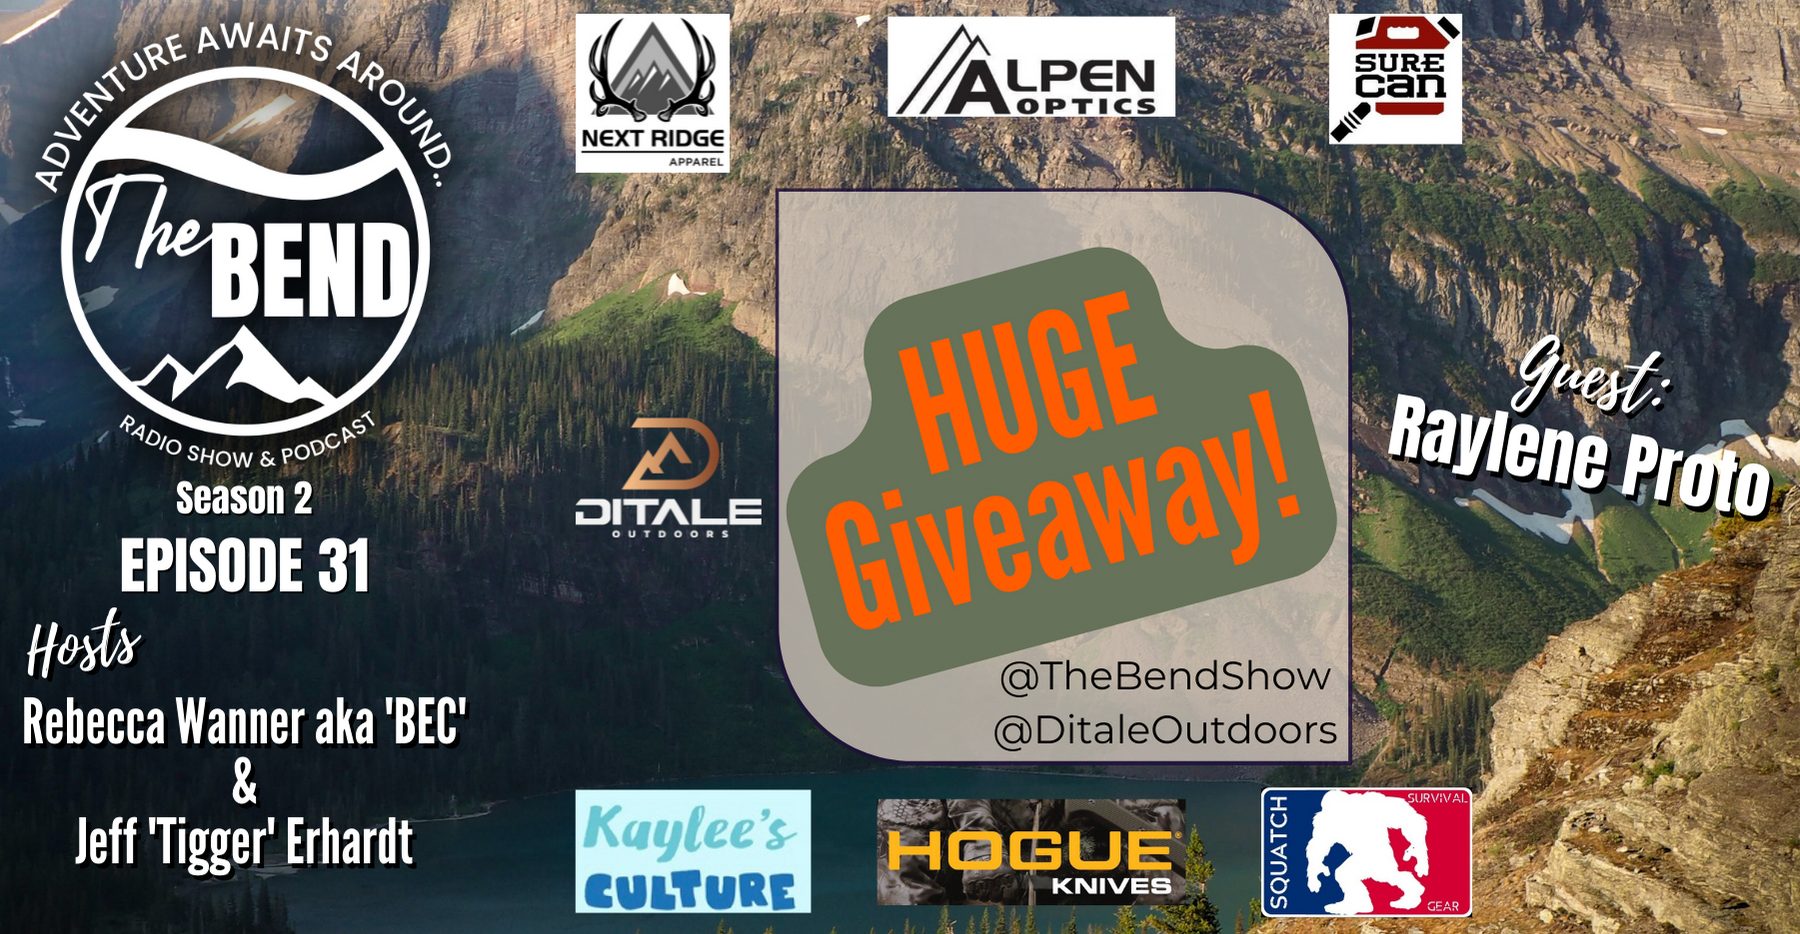 Contest Giveaway! Outdoor News & Gift Ideas!